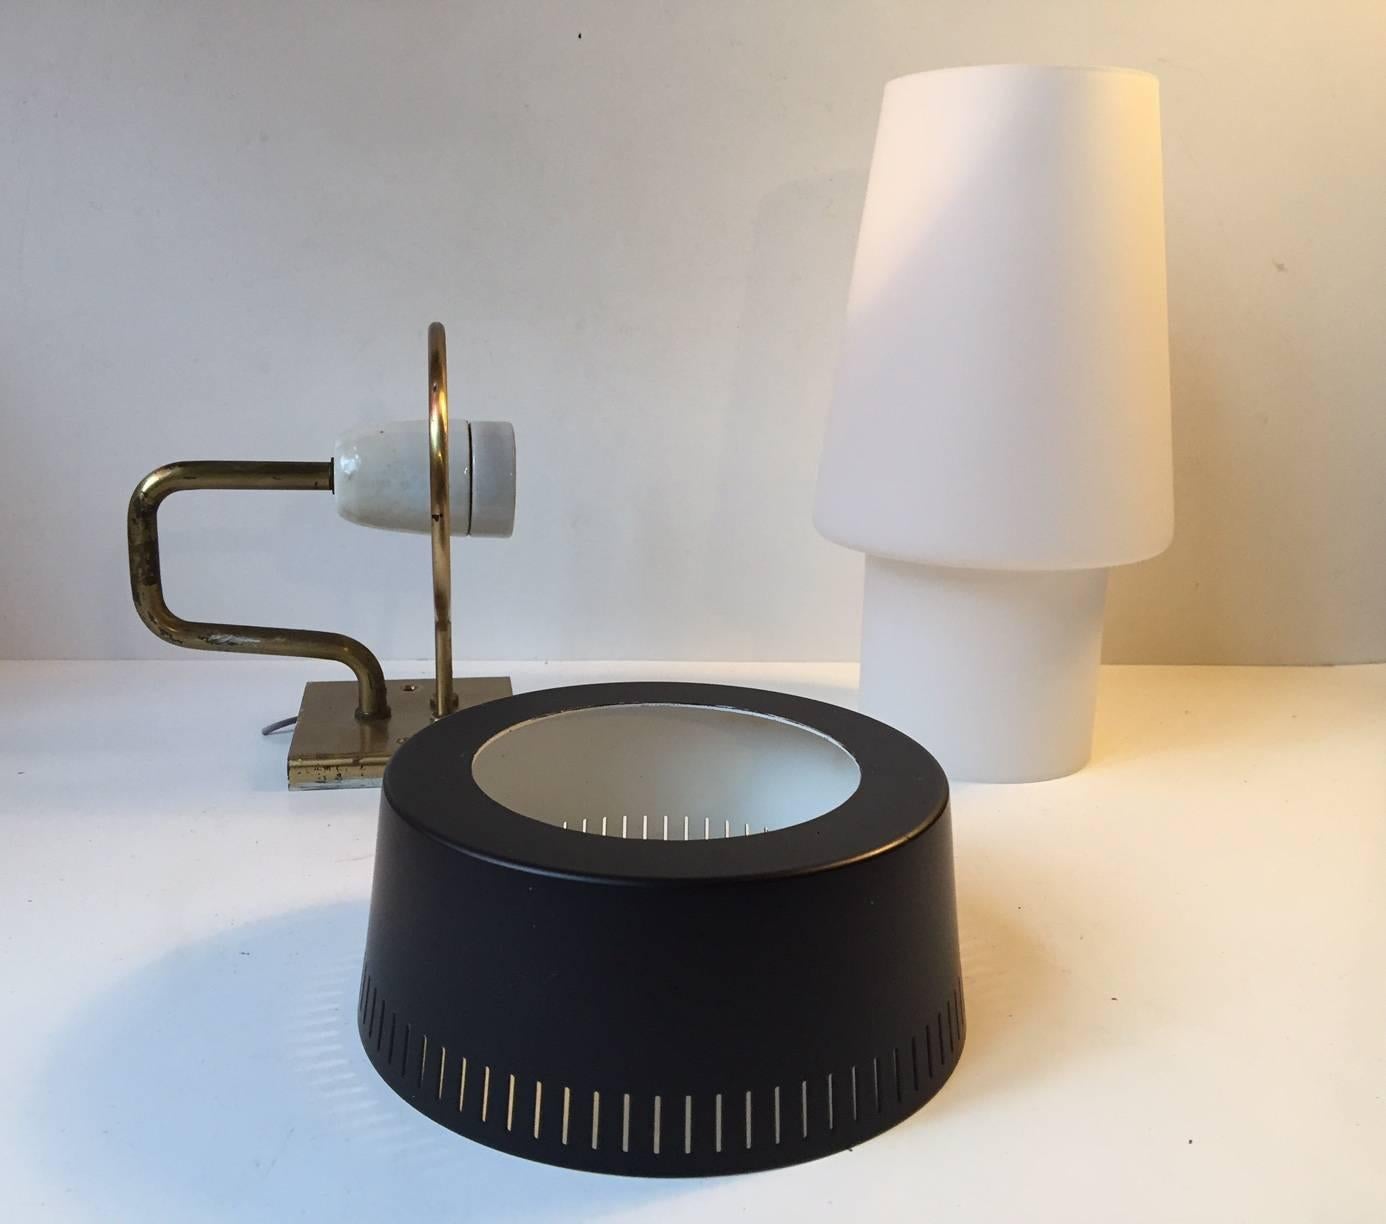 Aluminum Danish Modernist Cased Glass and Brass Wall Light by Bent Karlby for Lyfa, 1950s